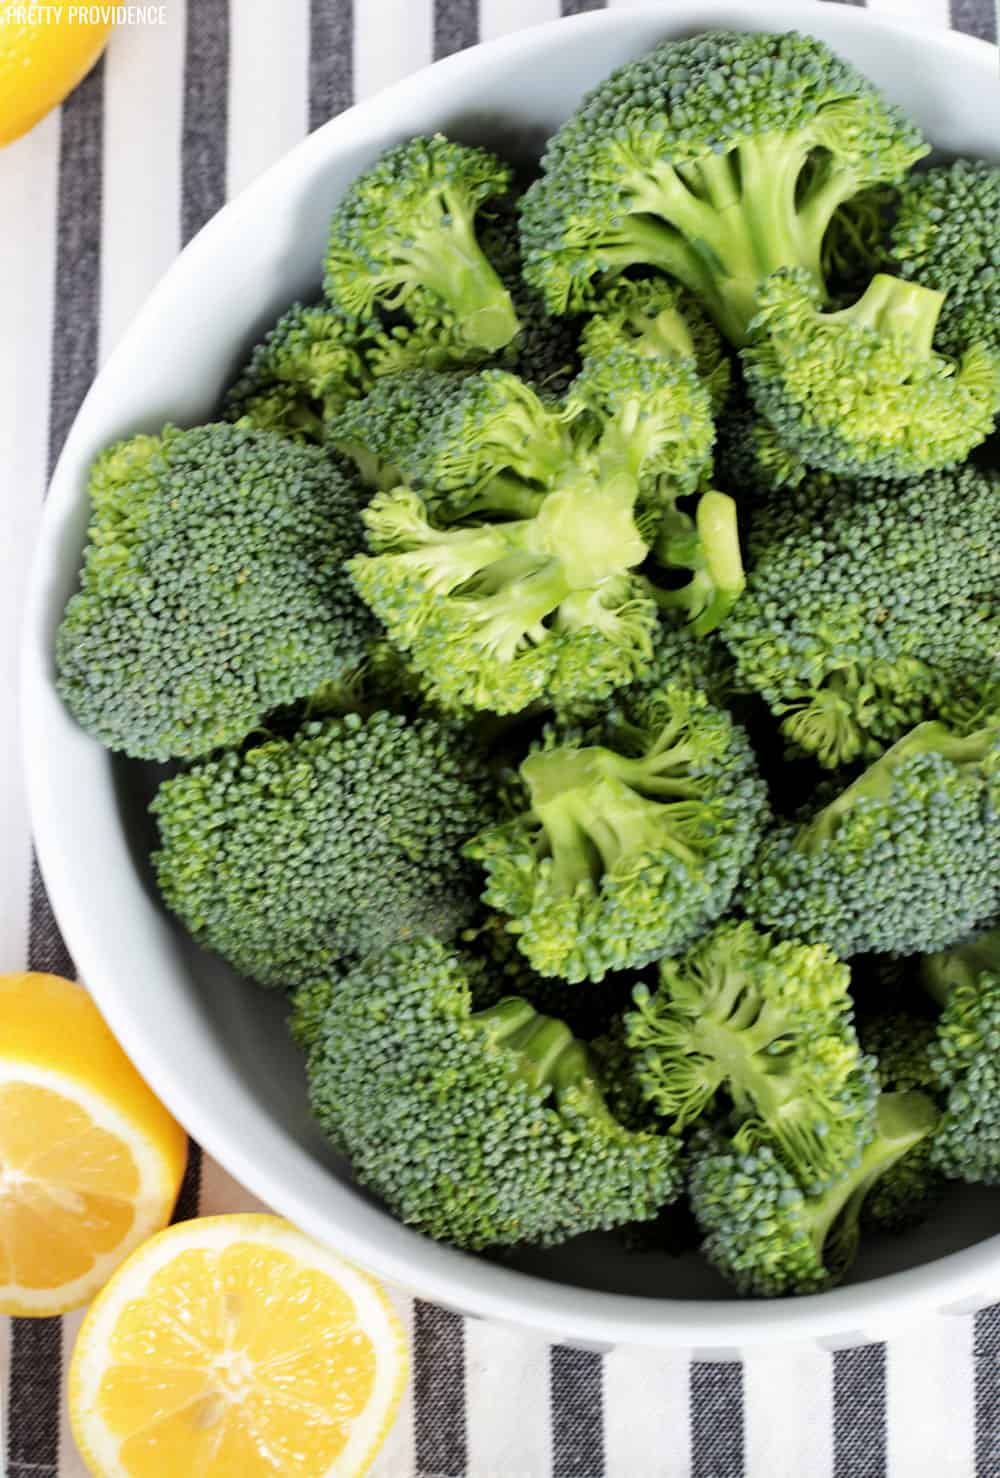 a white bowl full of raw broccoli on a white and grey striped background